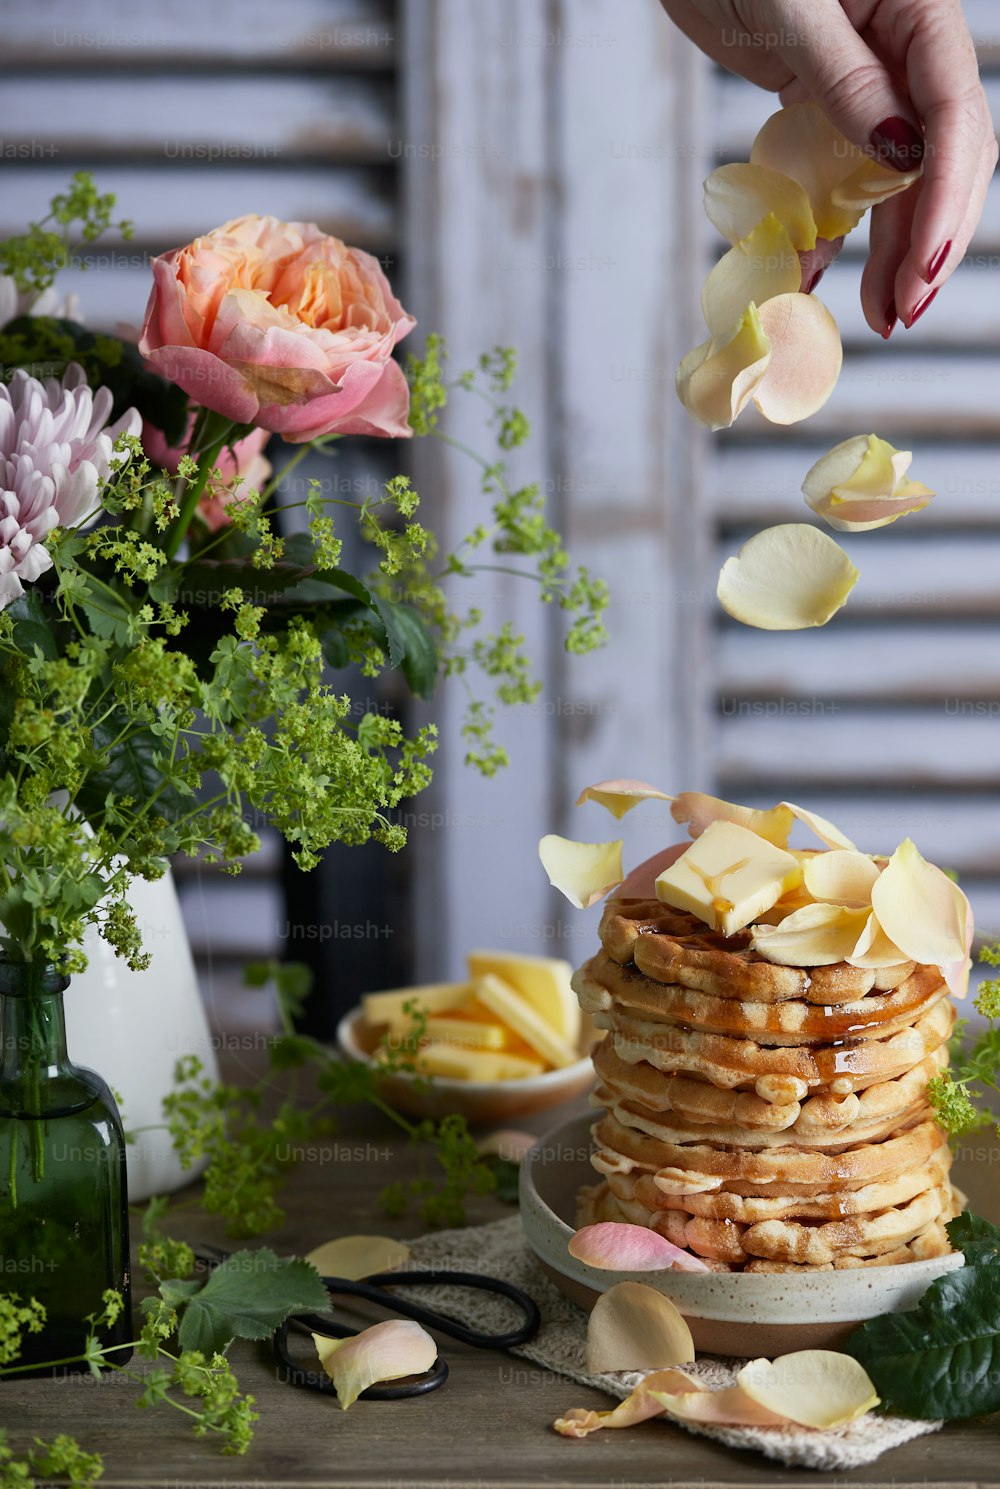 a stack of pancakes on a plate with flowers in the background